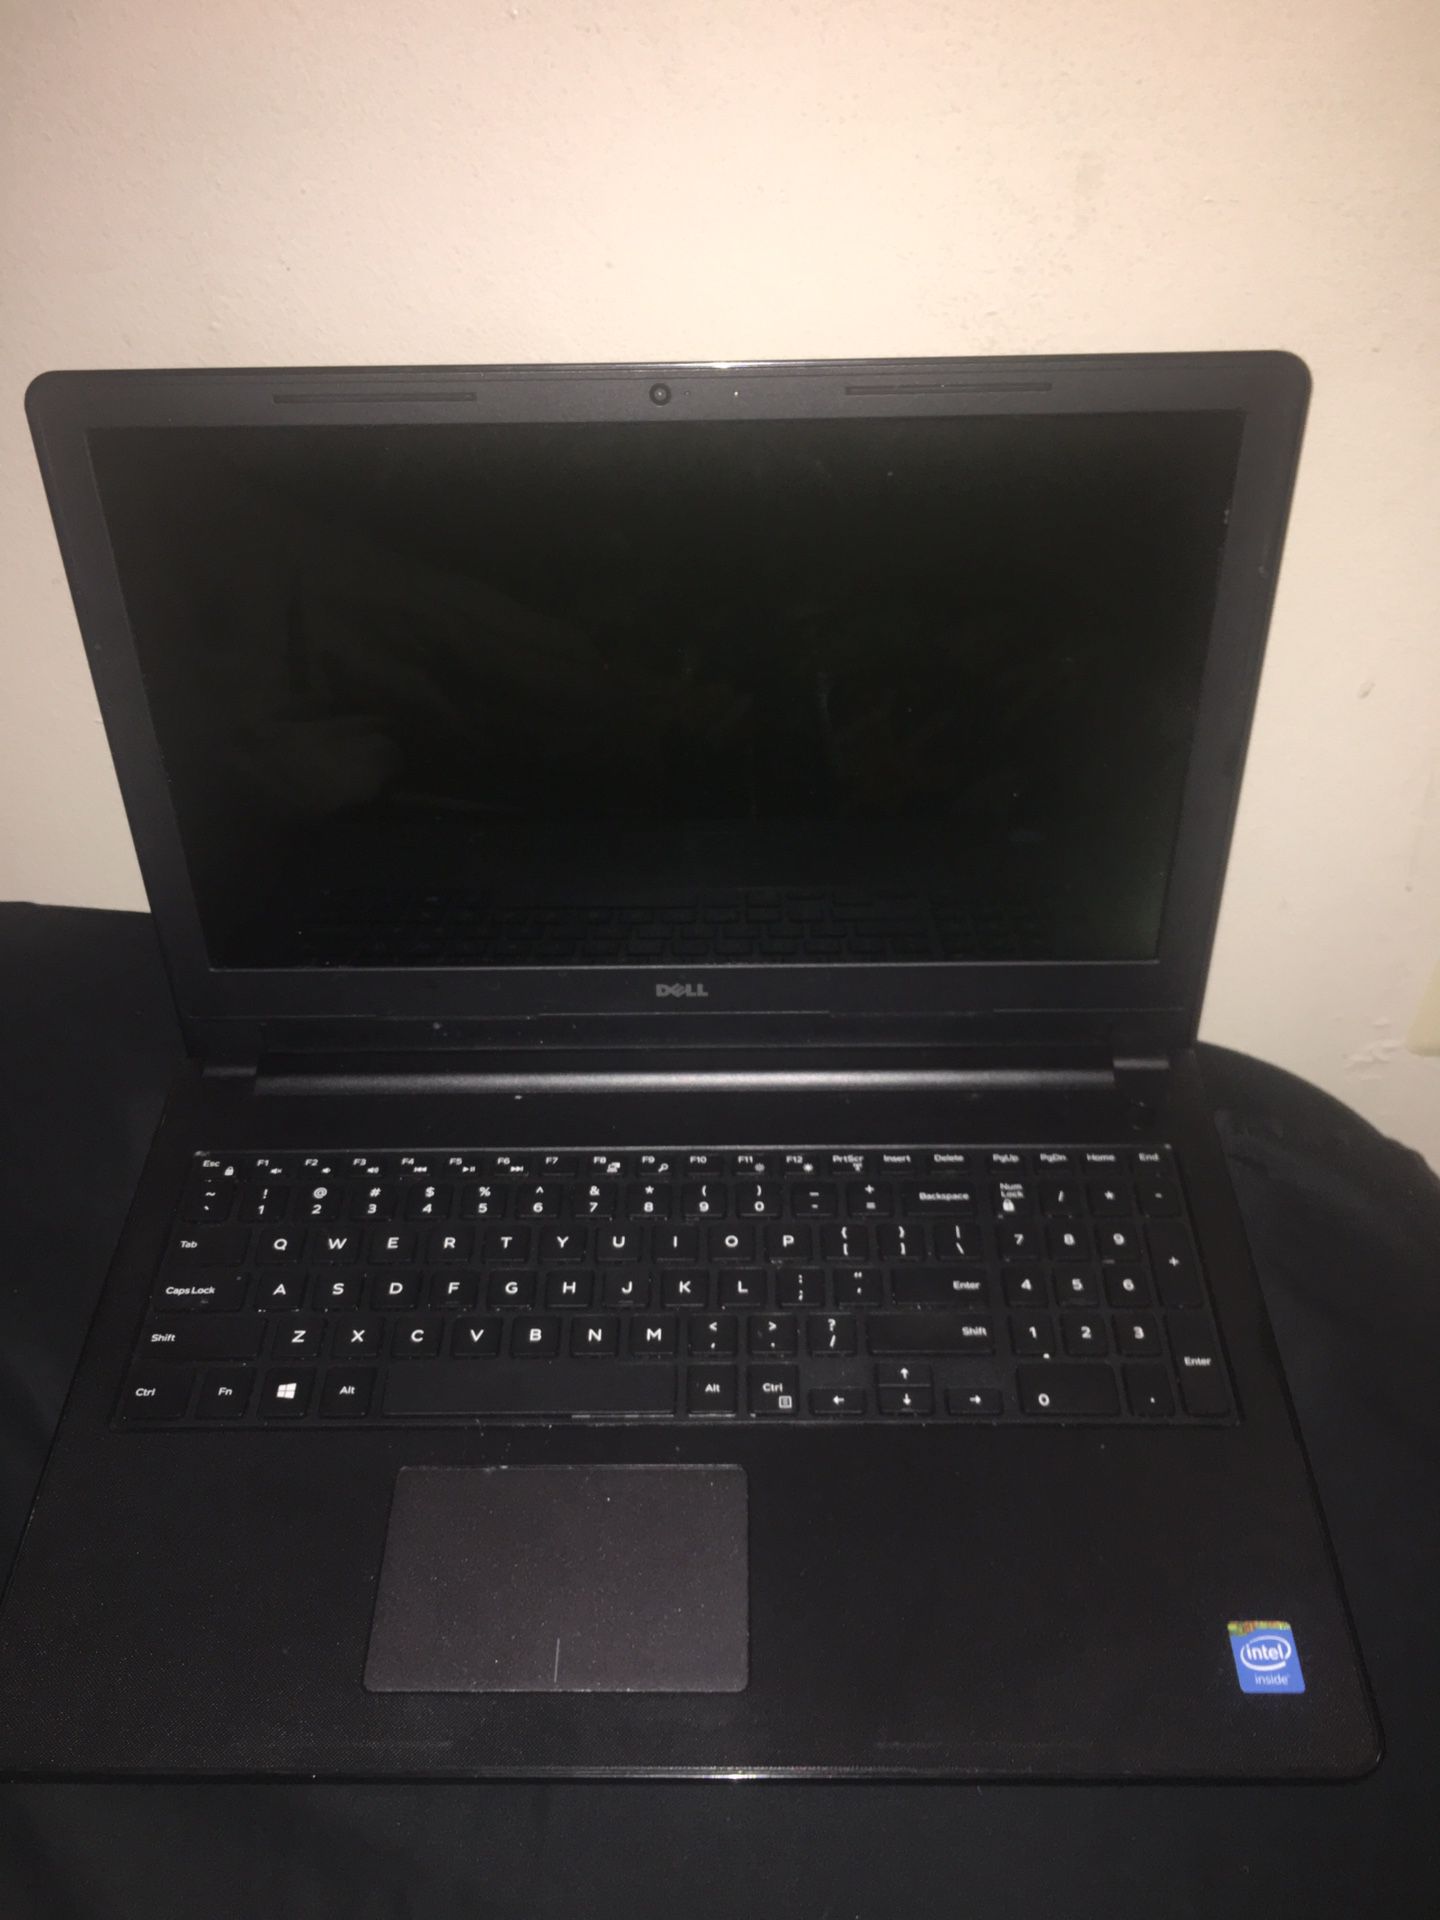 Laptop brand new just need a charger